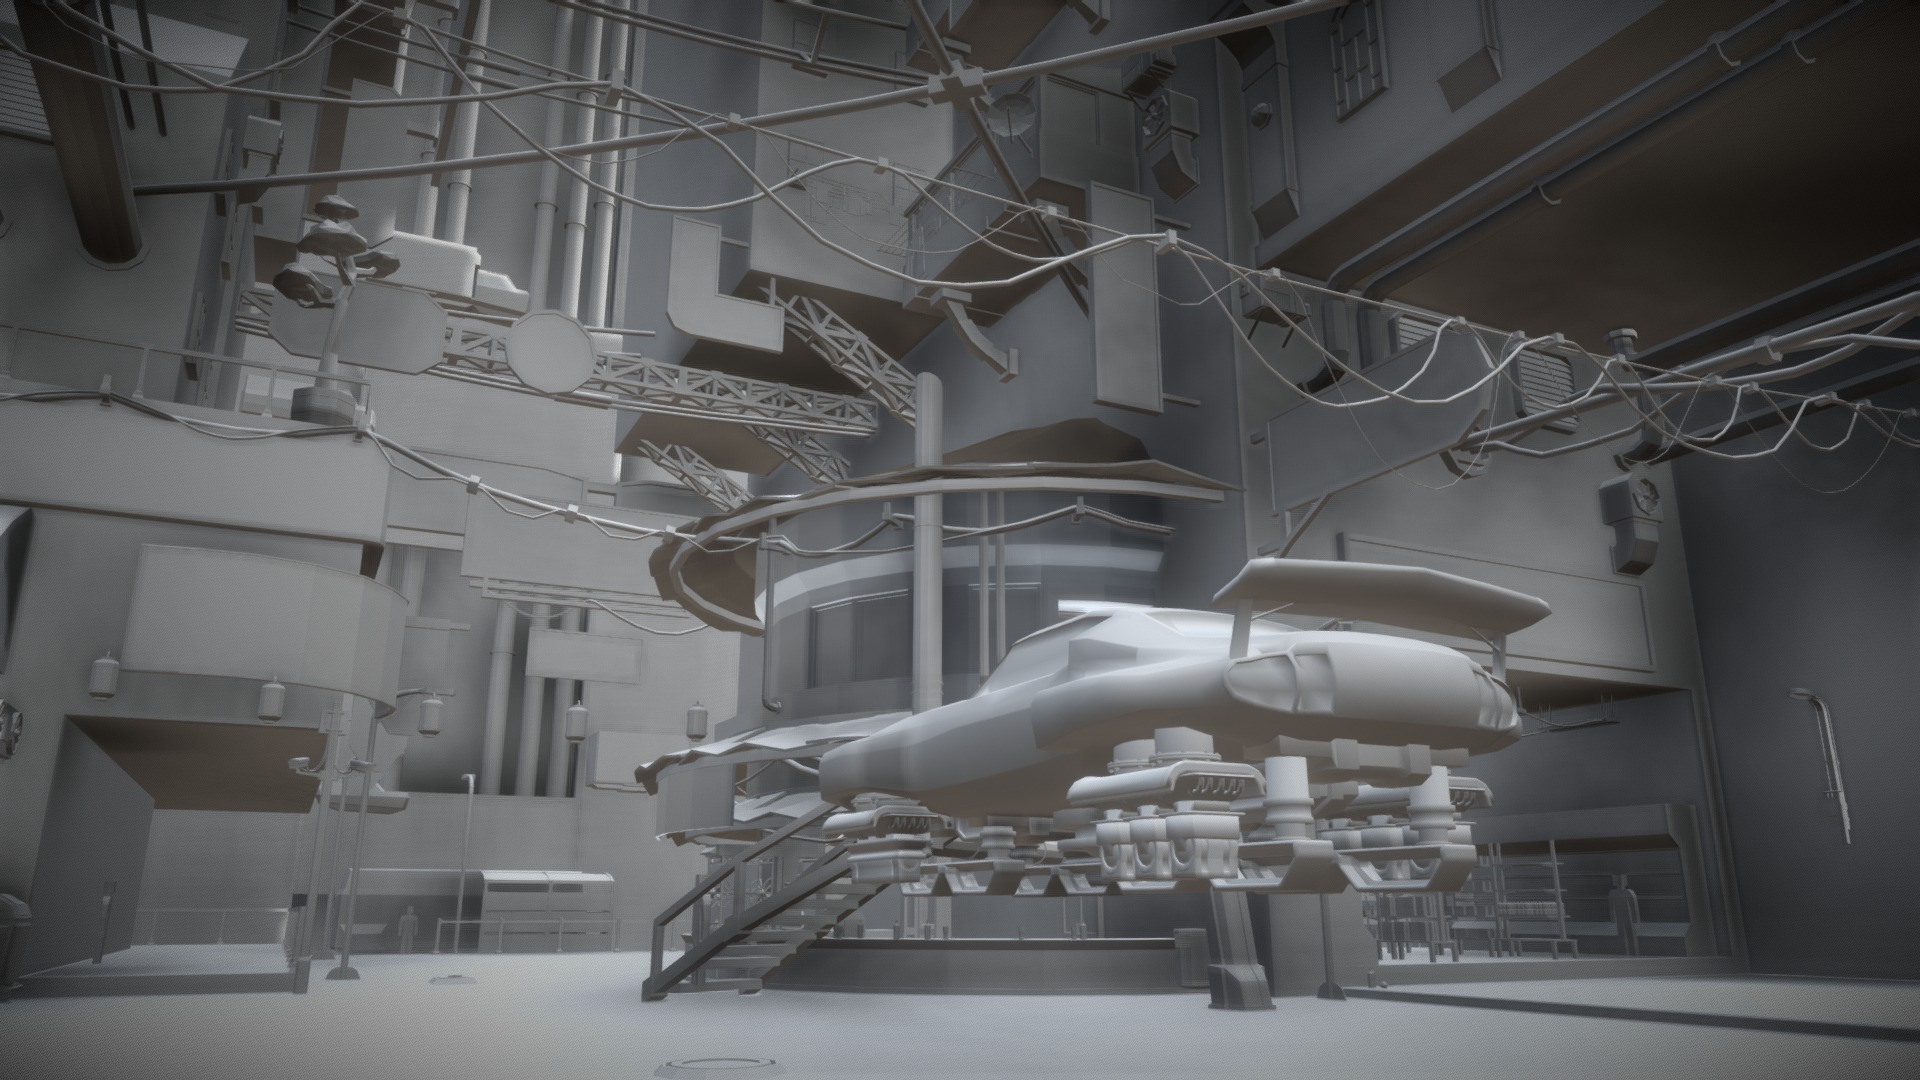 3D model Cyberpunk City assets - This is a 3D model of the Cyberpunk City assets. The 3D model is about a large white airplane in a warehouse.